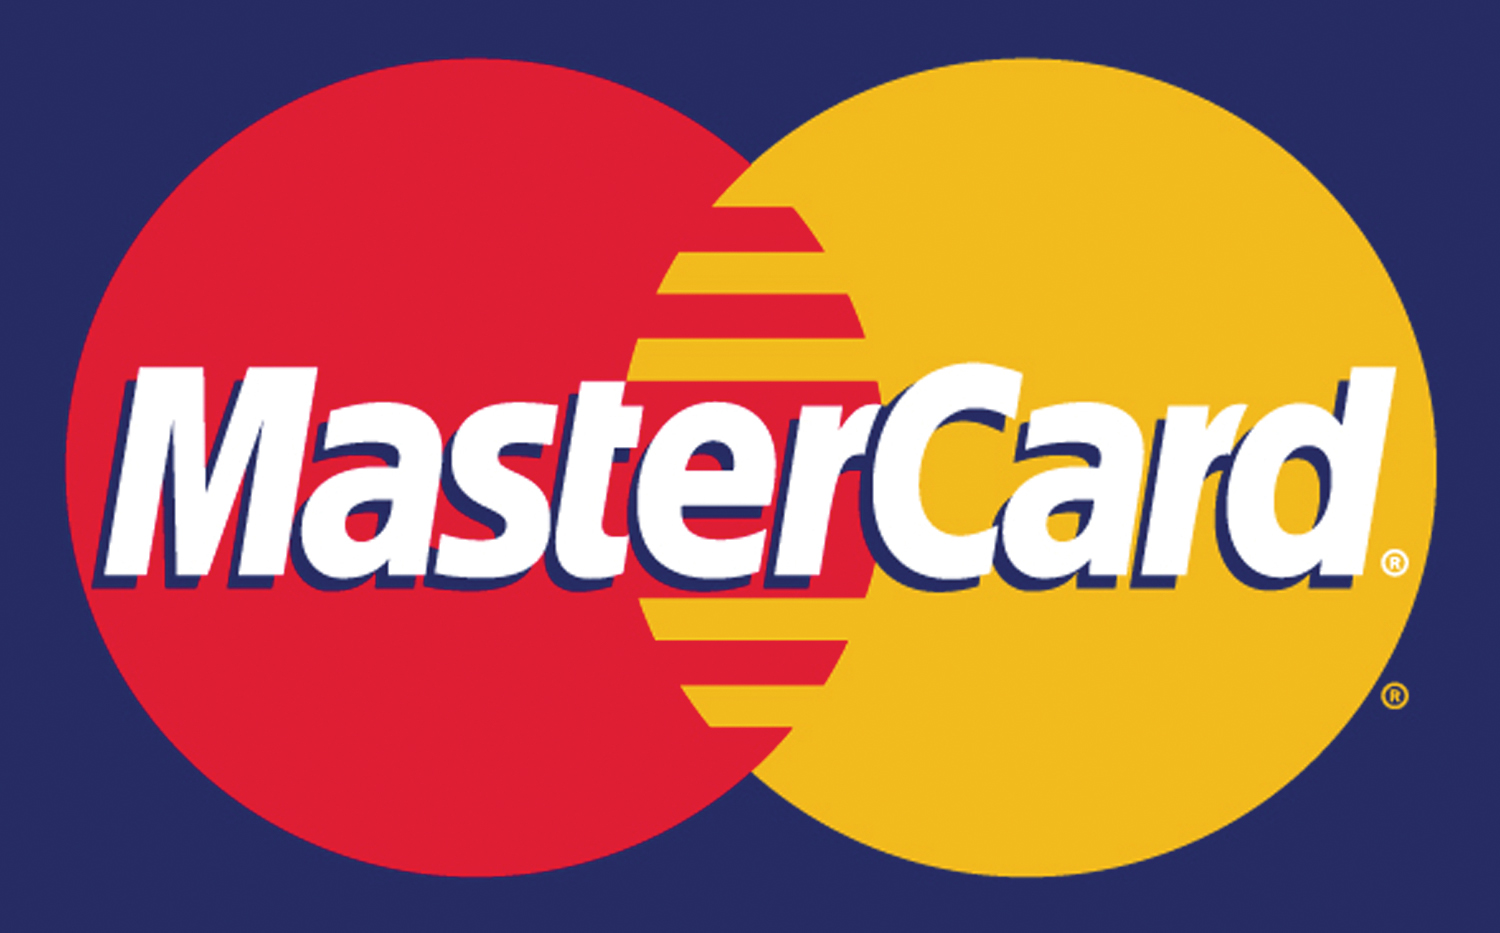 We Accept Master Card